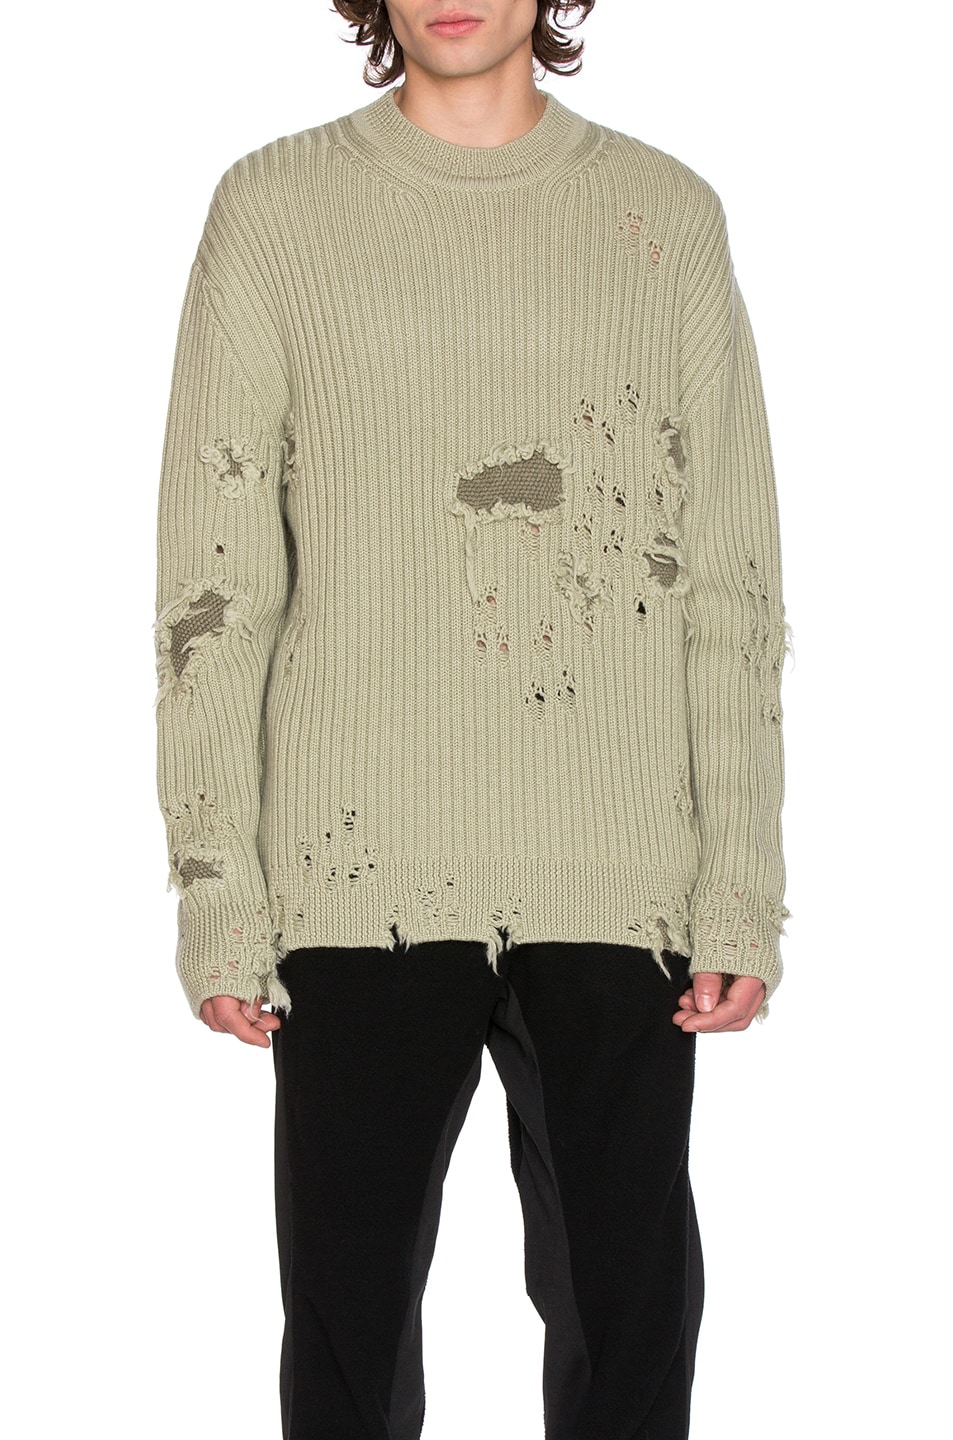 Image 1 of YEEZY Season 3 Destroyed Military Rib Sweater in Military Light